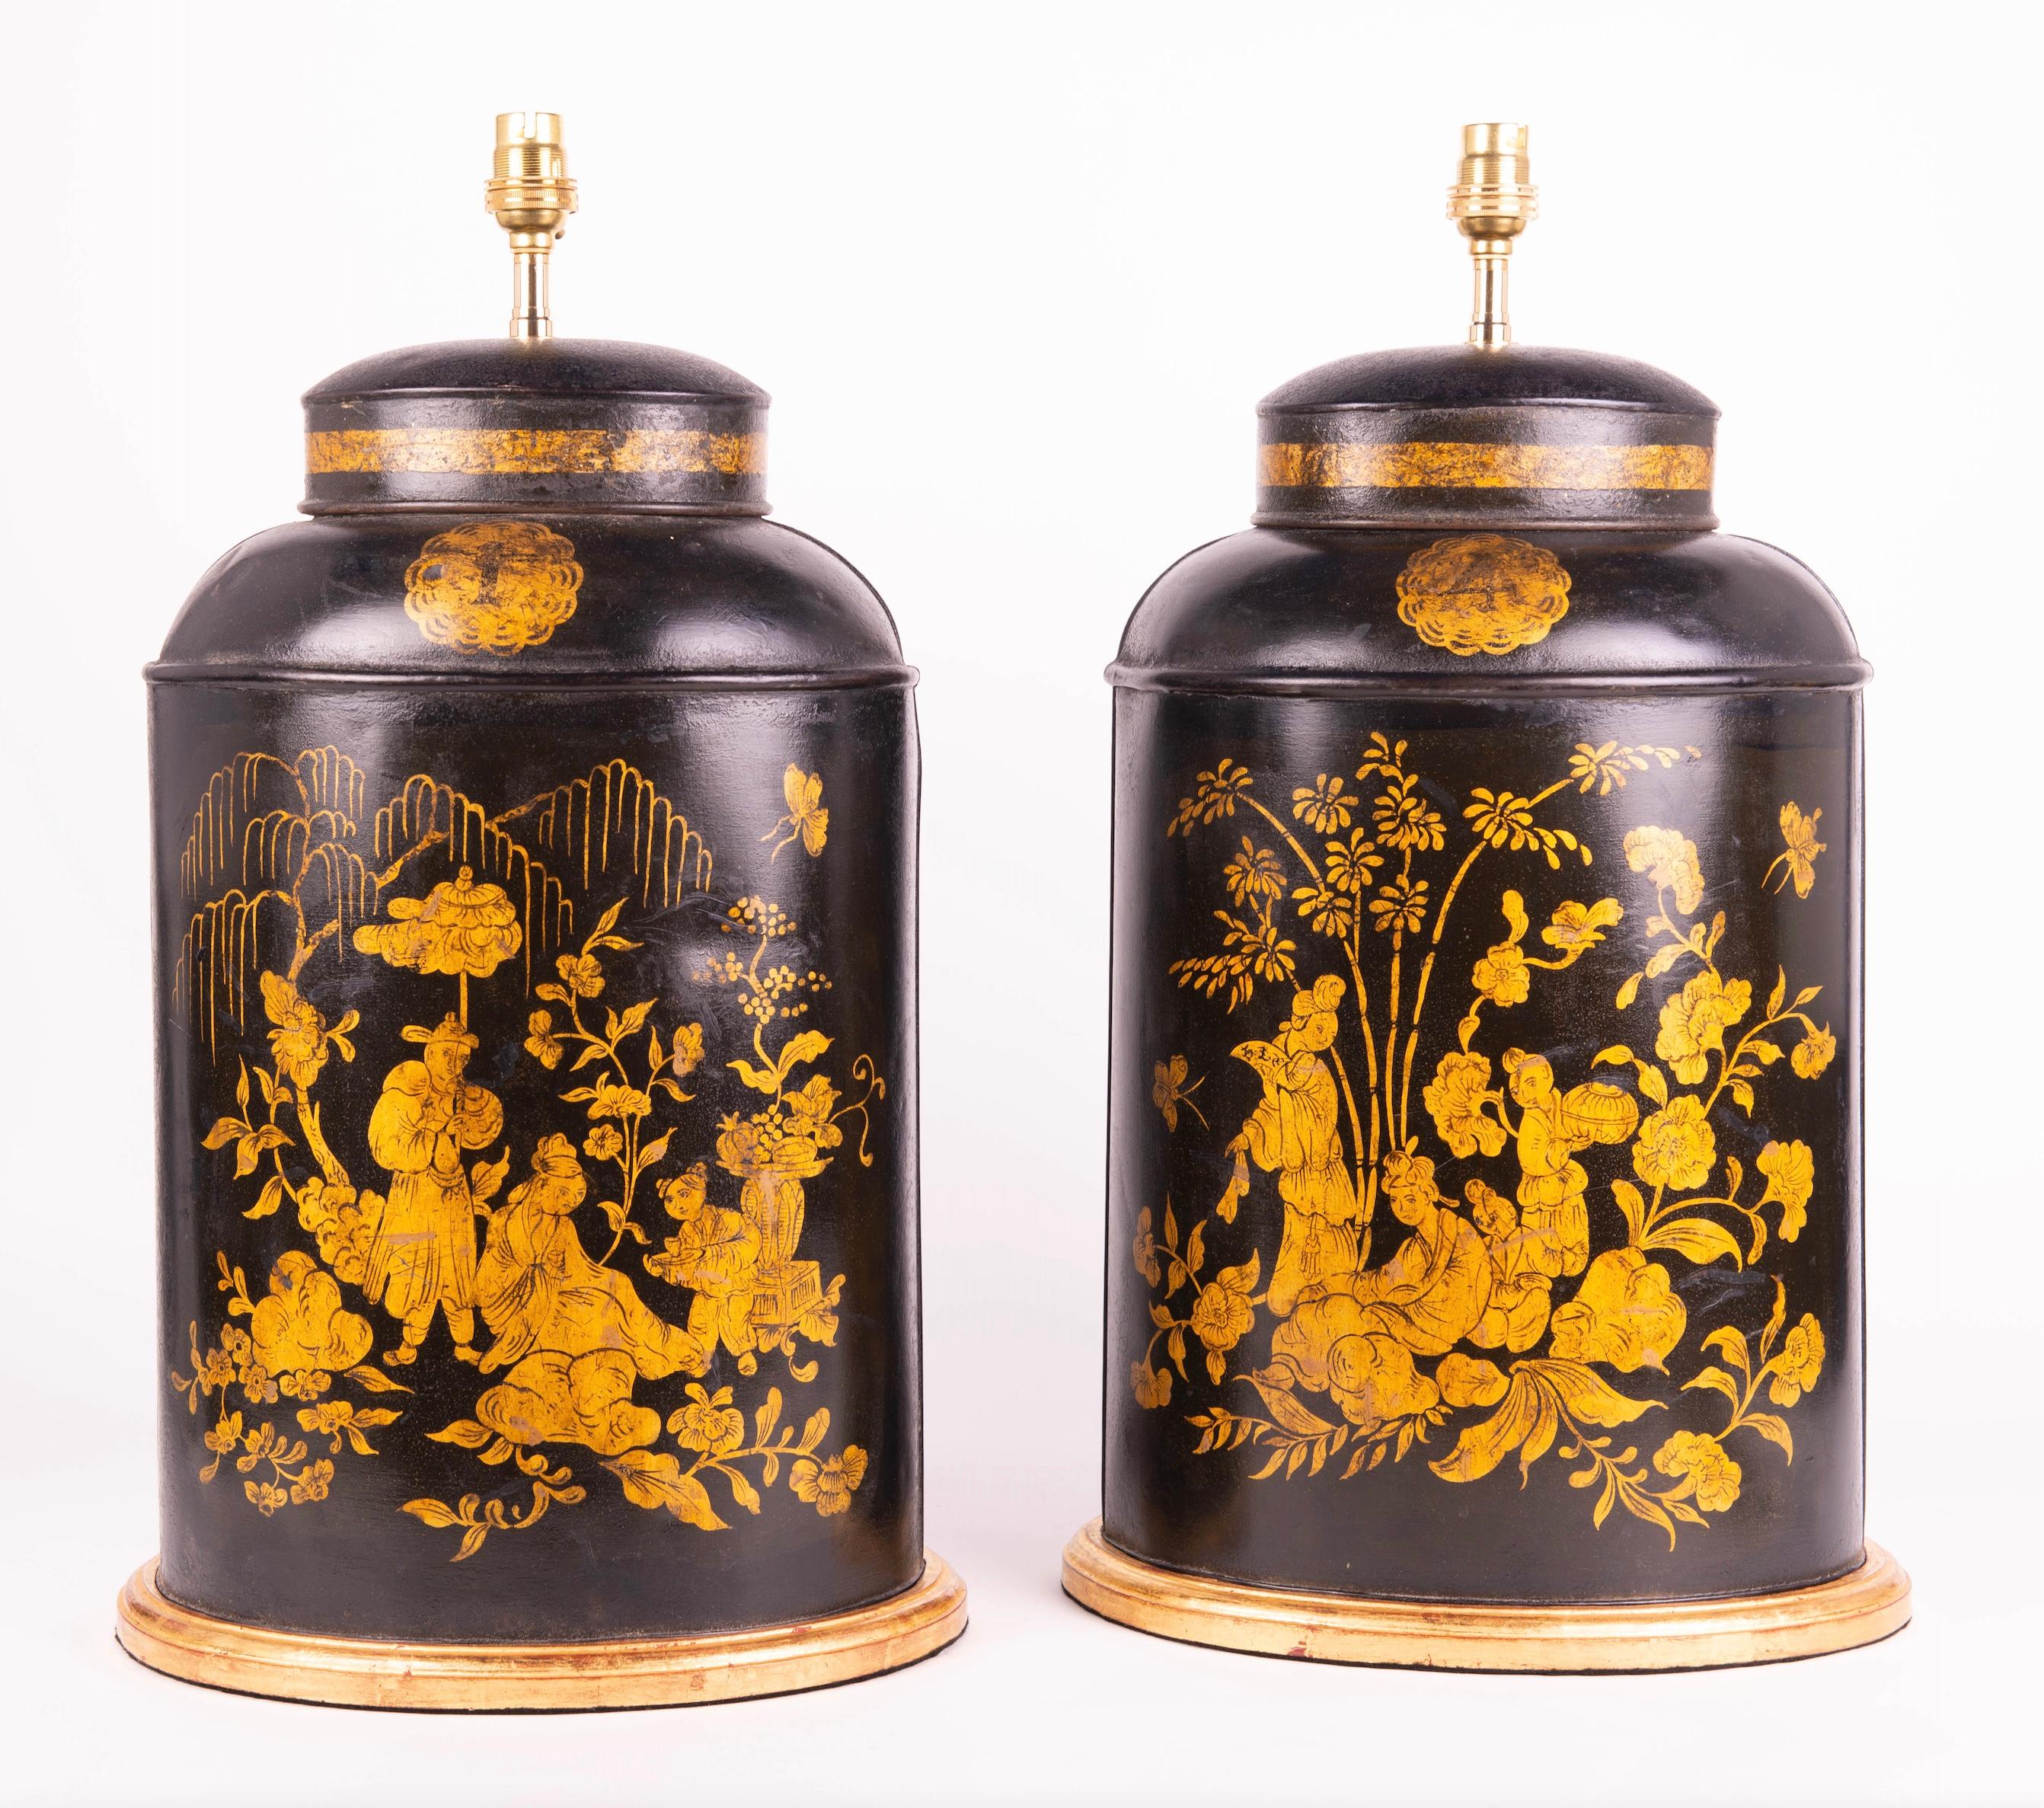 A fine pair of 19th century oval tole tea canisters by Bartlett & Co. of Bristol, decorated with gilded chinoiserie scenes on a black background, now mounted as lamps with a hand gilded turned bases.

Height of vase: 17 3/4 in (45 cm) including